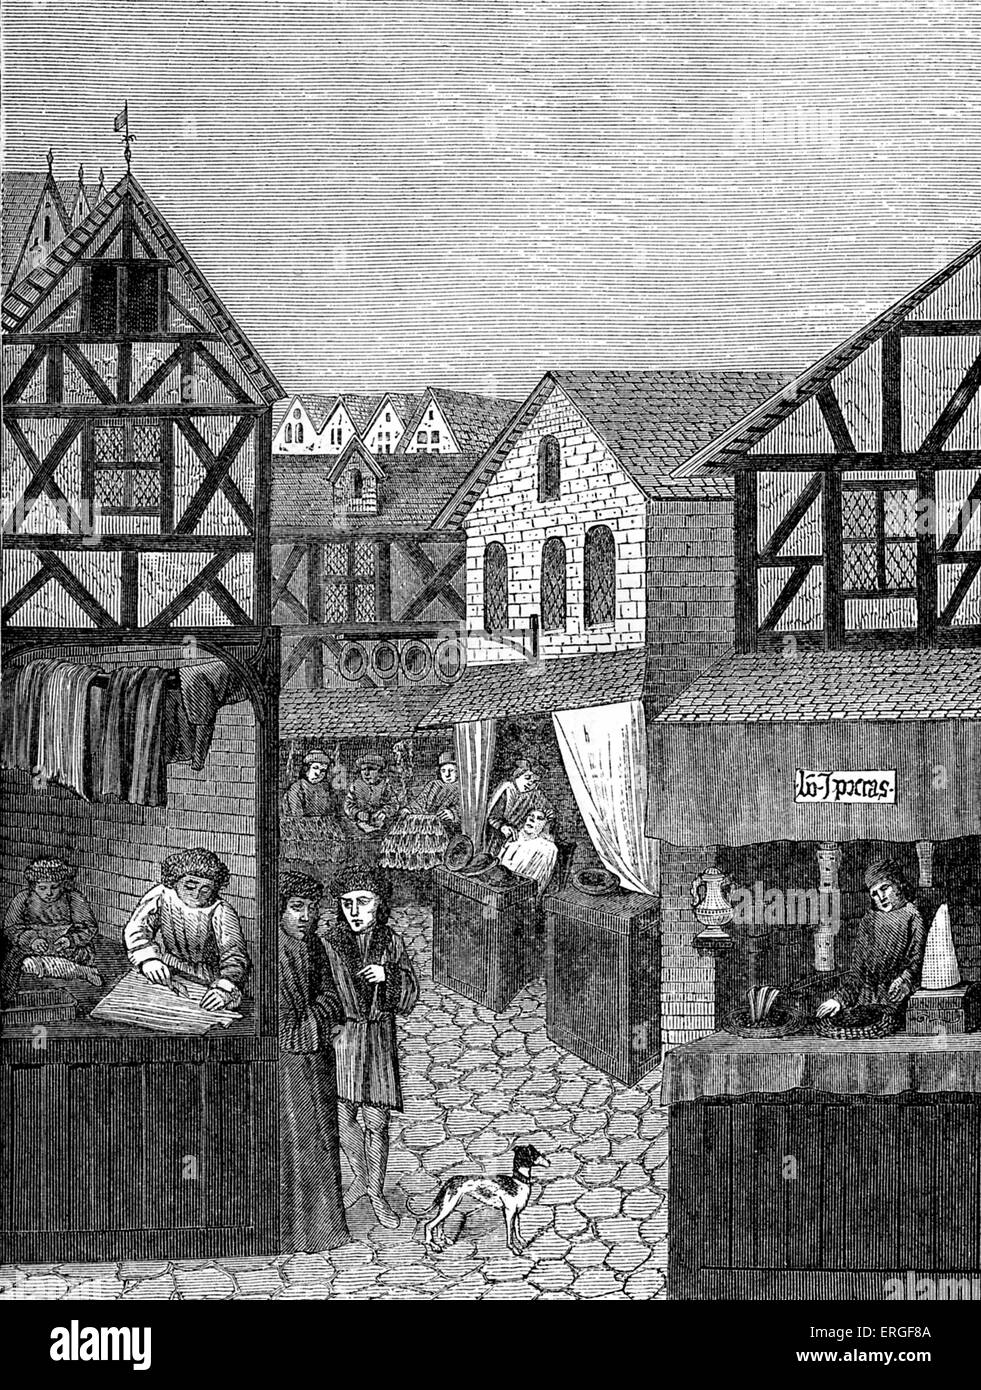 Shops in an Apothecary's Street : Barber, Furrier, and Tailor. From miniature in 'Regime des Princes', 15th century manuscript. Stock Photo